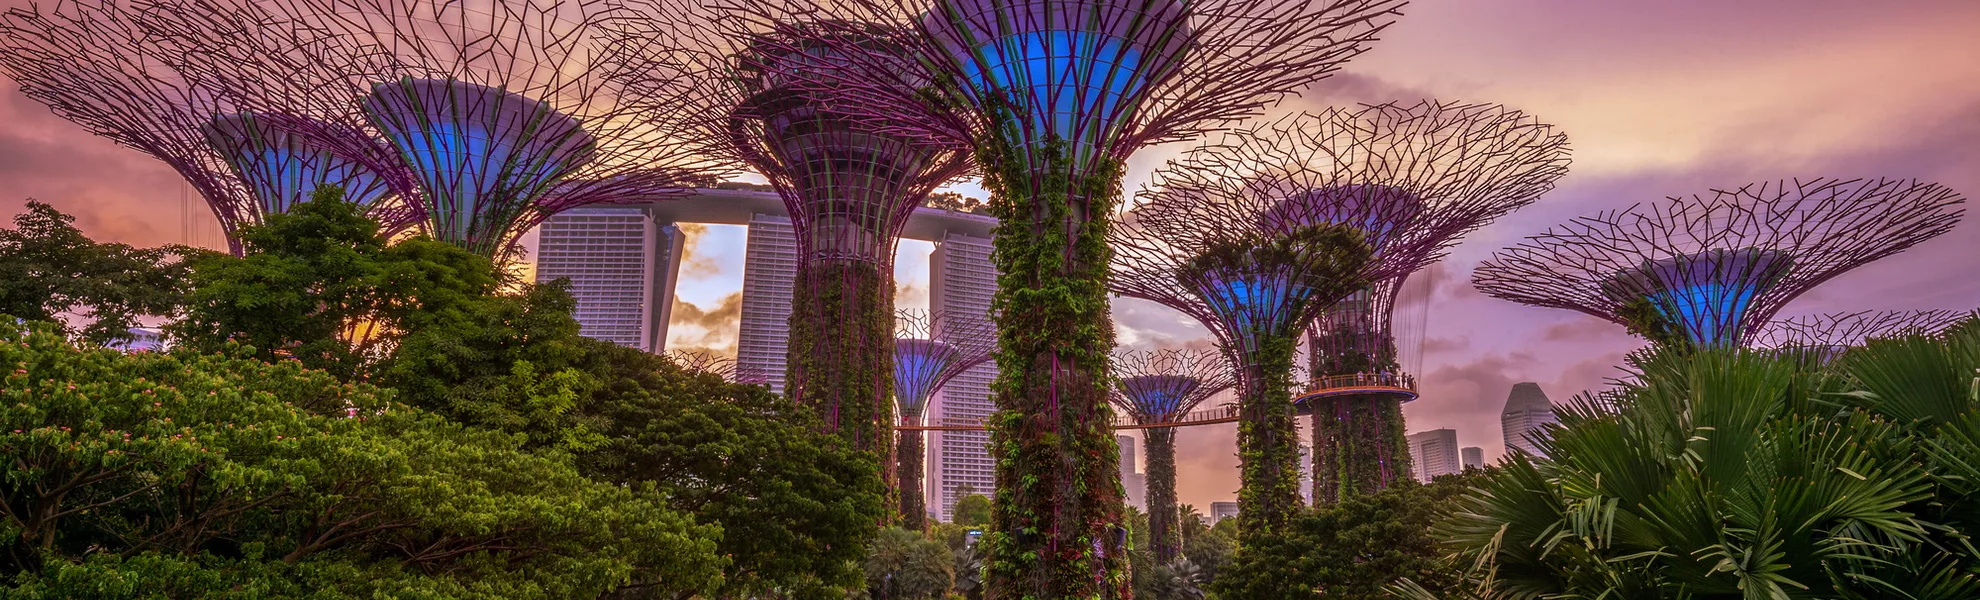 Gardens by the Bay in Singapur - © Richie Chan - stock.adobe.com